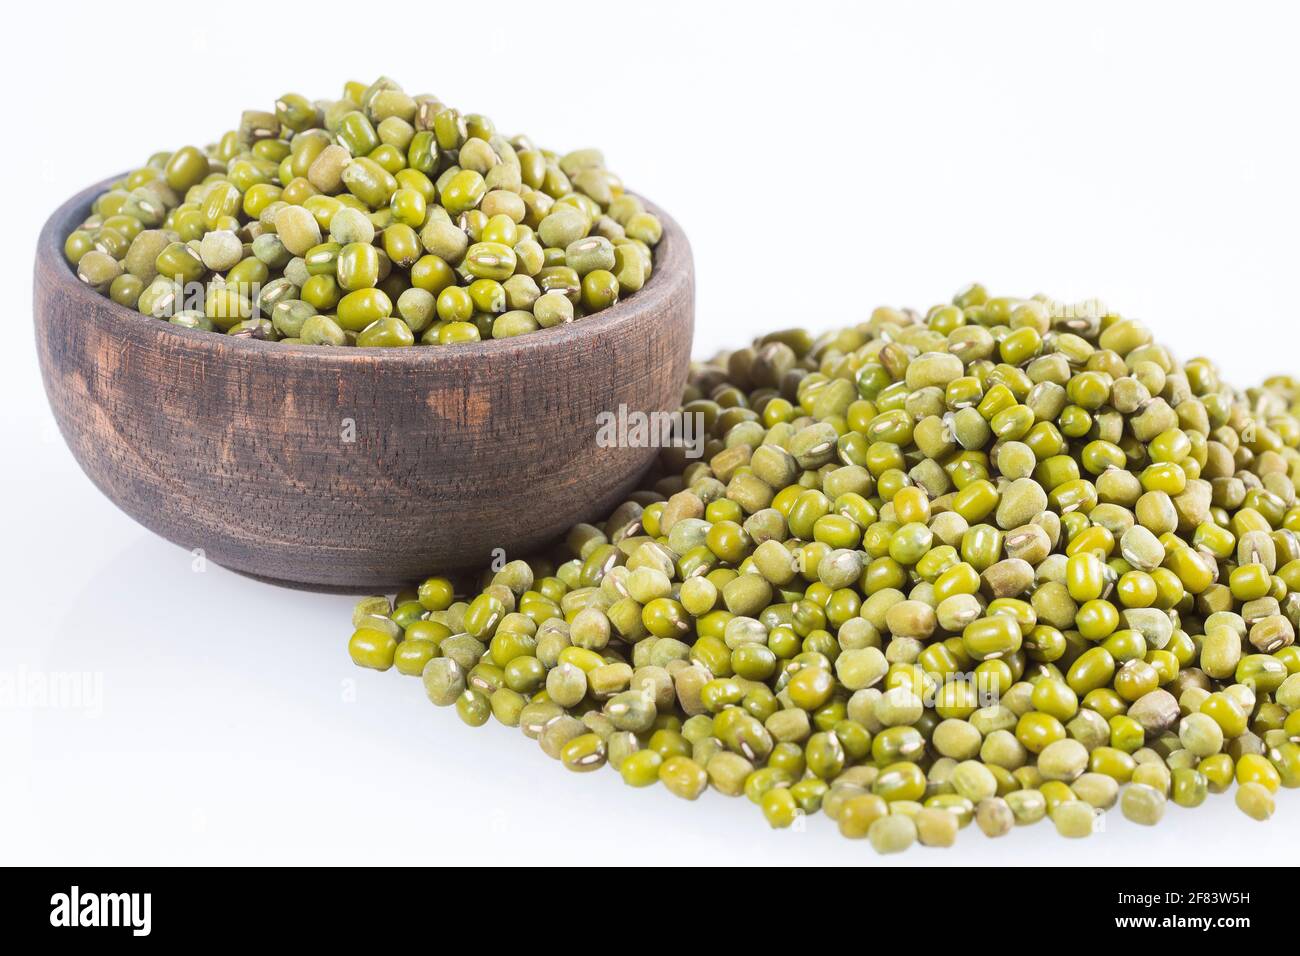 Bean Mung variety of beans in green color - Vigna radiata. White background Stock Photo